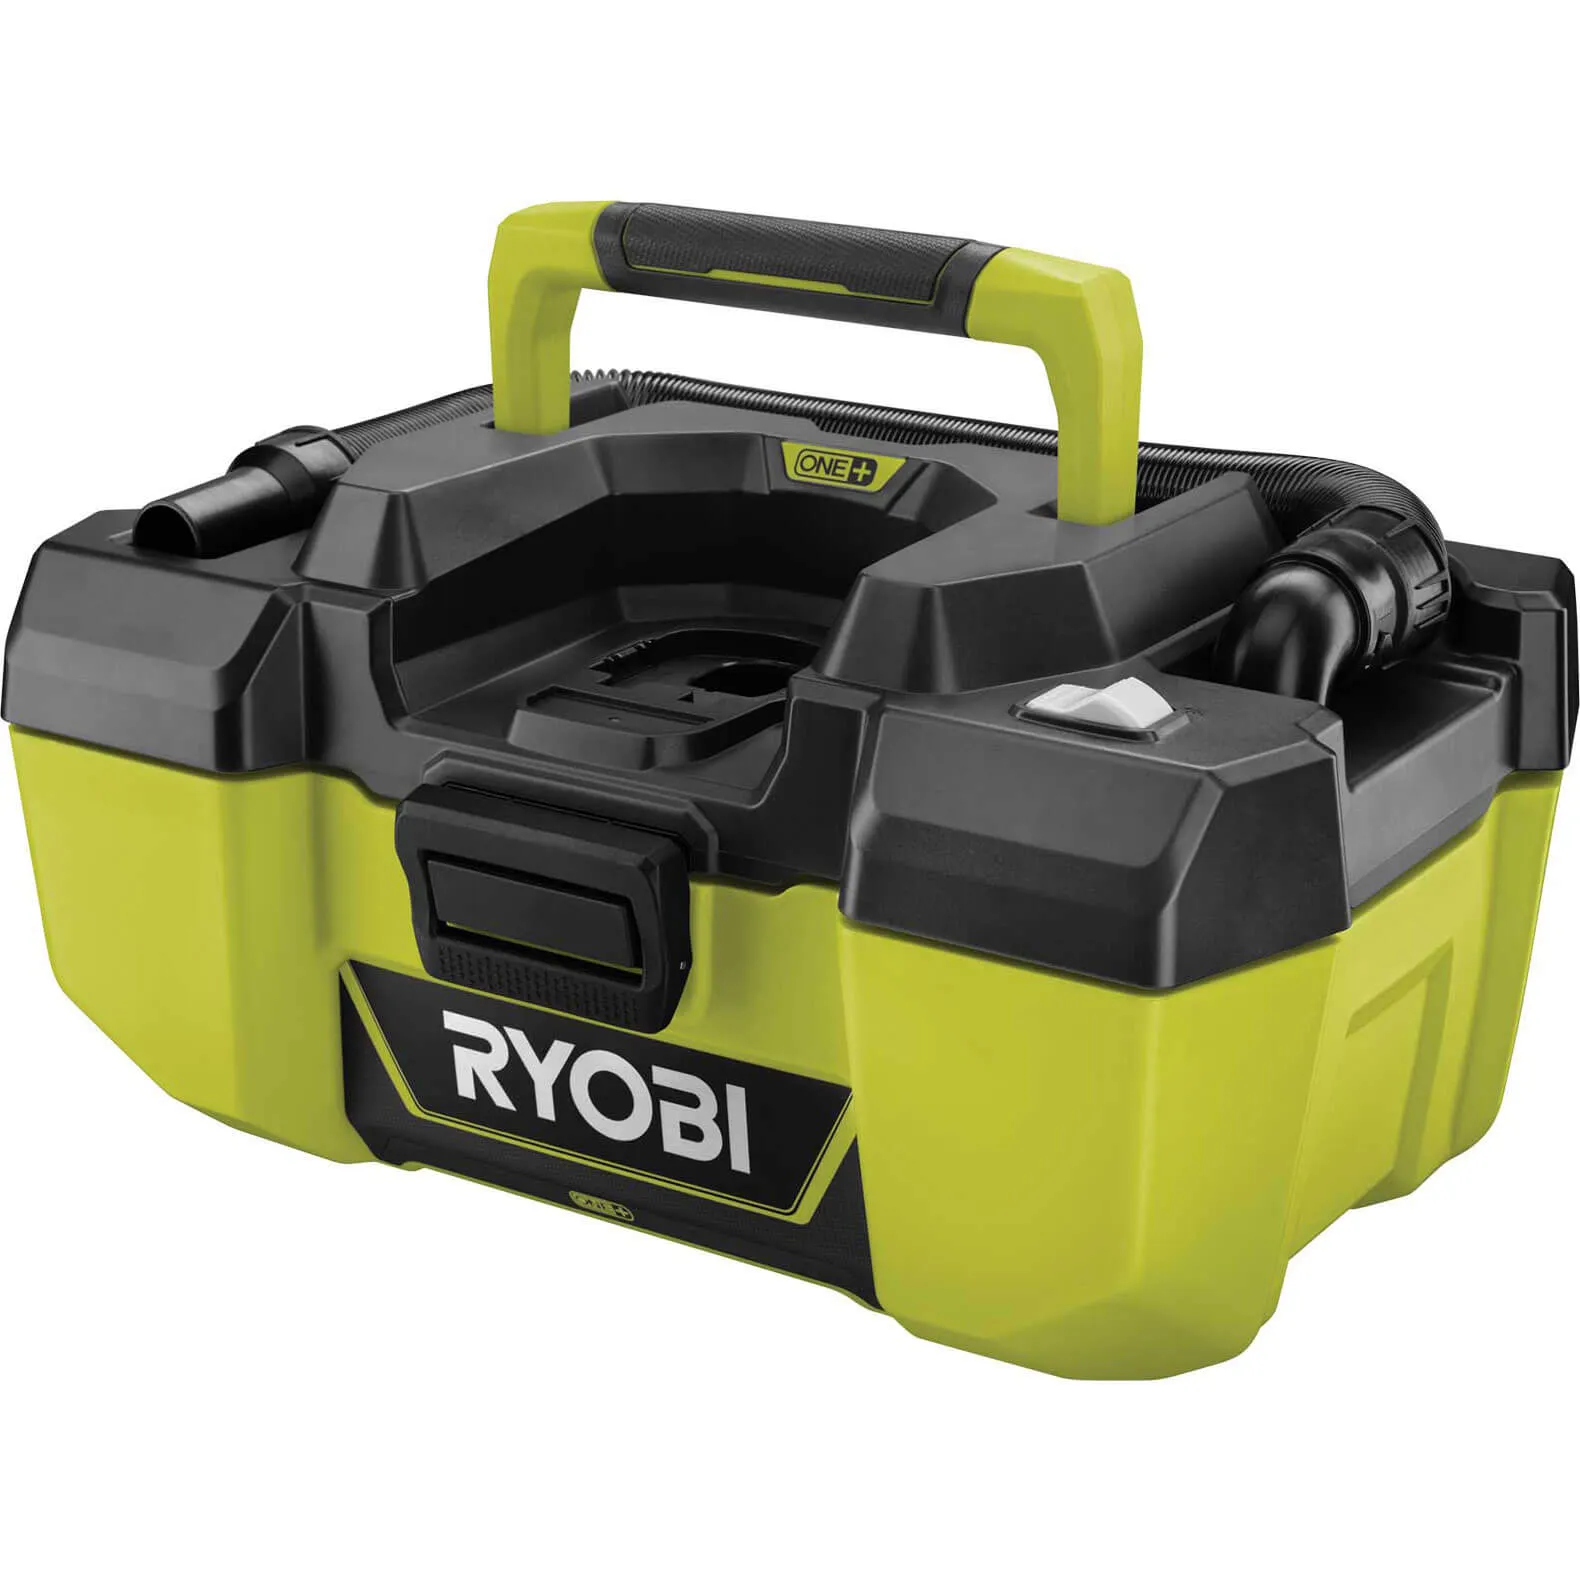 Ryobi R18PV ONE+ 18v Cordless Project Vacuum Cleaner - No Batteries, No Charger, No Case